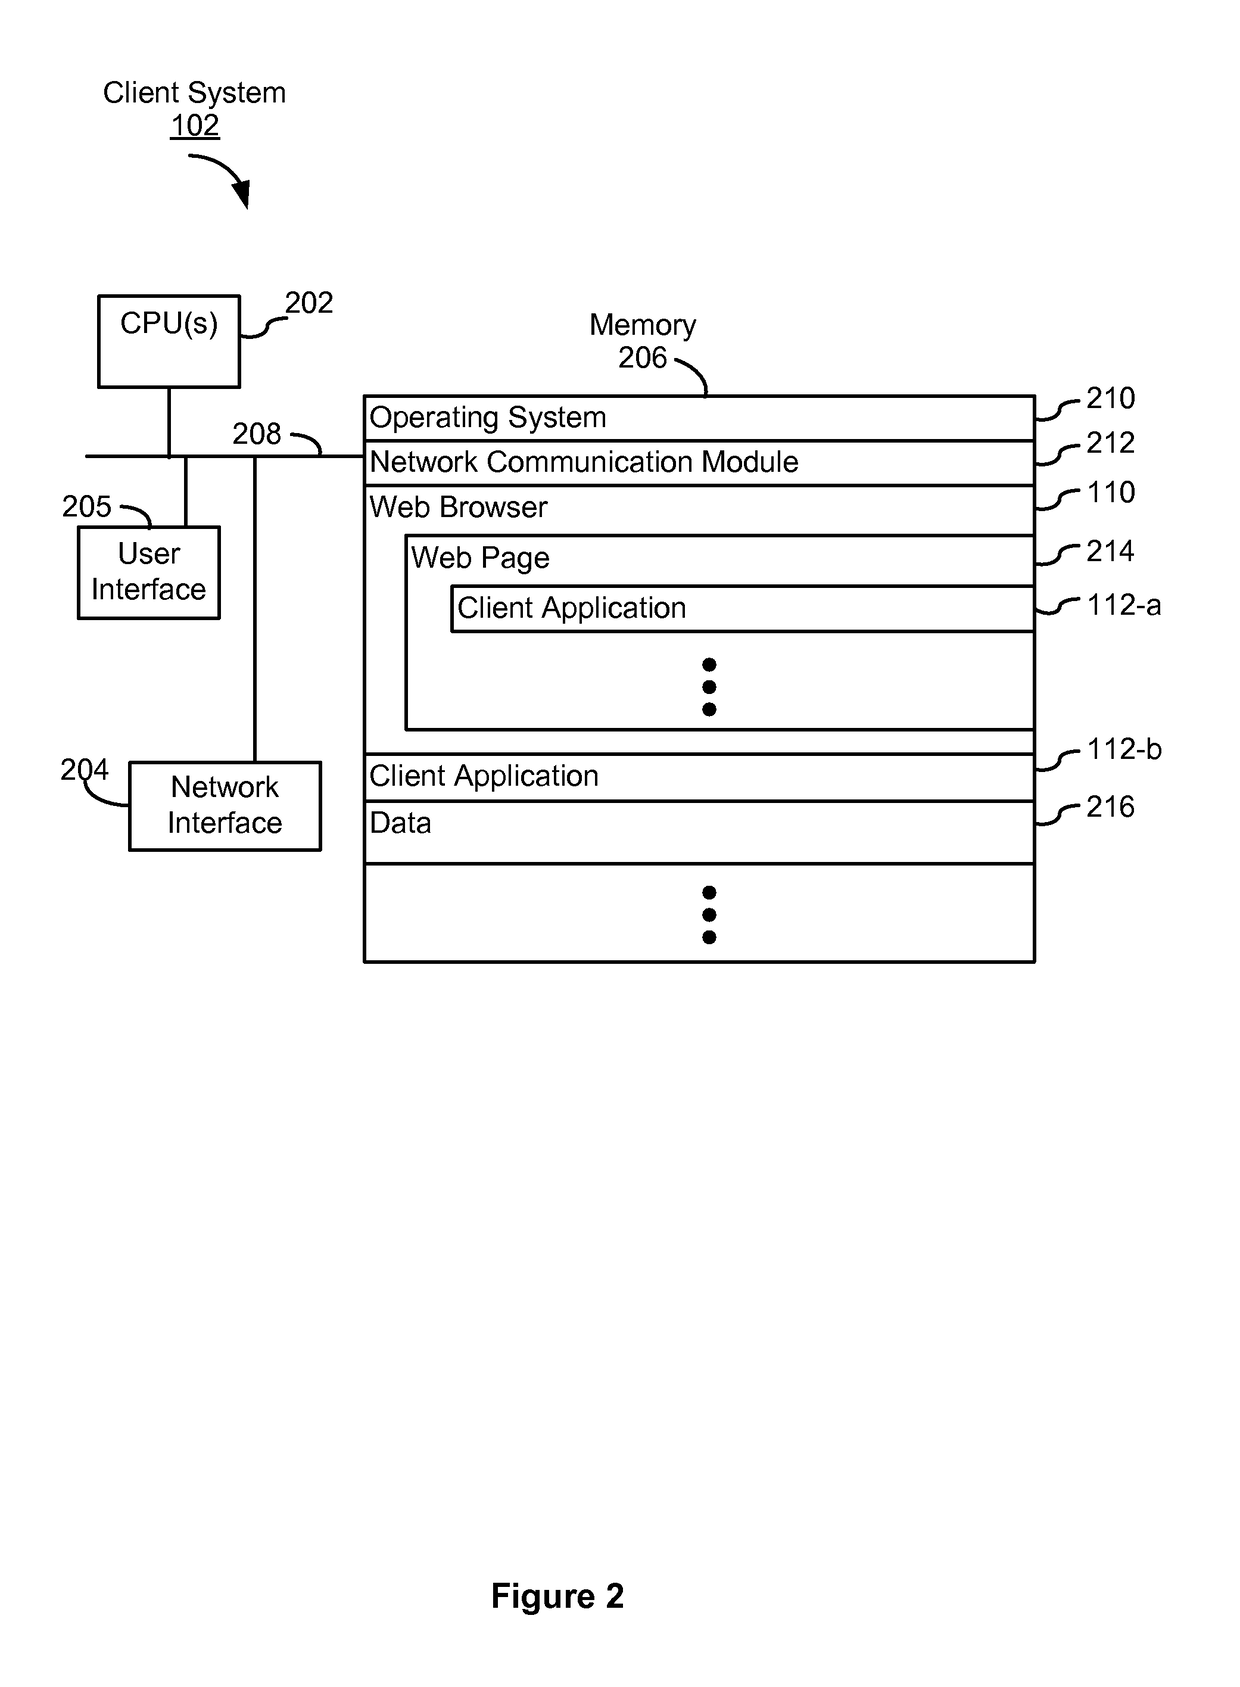 Transmitting and receiving data between databases with different database processing capabilities